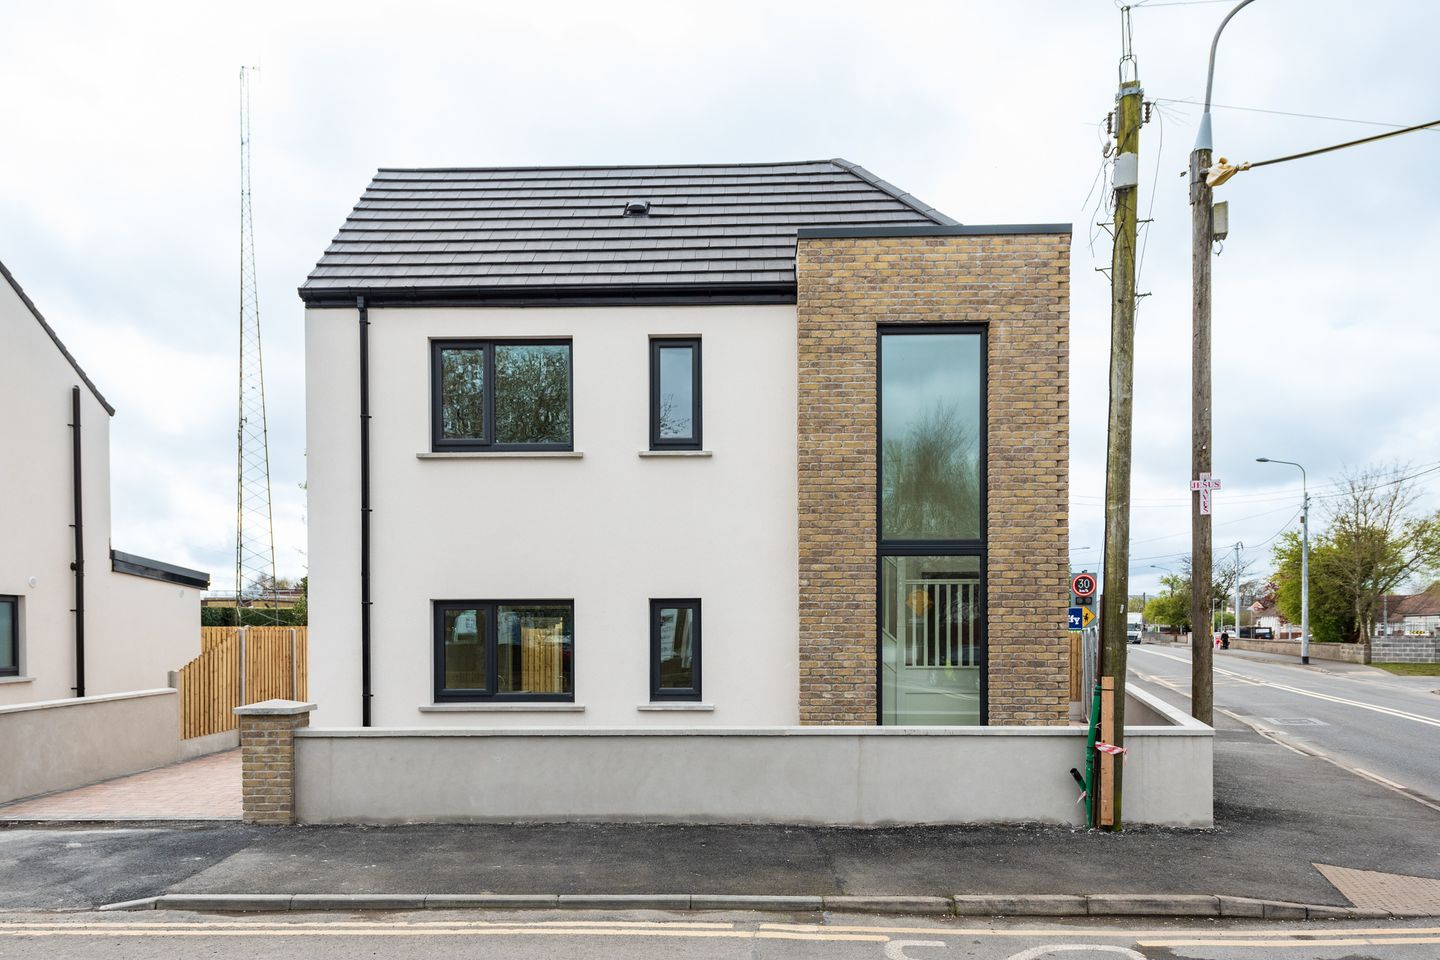 House Type A, Old Connell Mews, Old Connell Mews, Naas Road, Newbridge, Co. Kildare